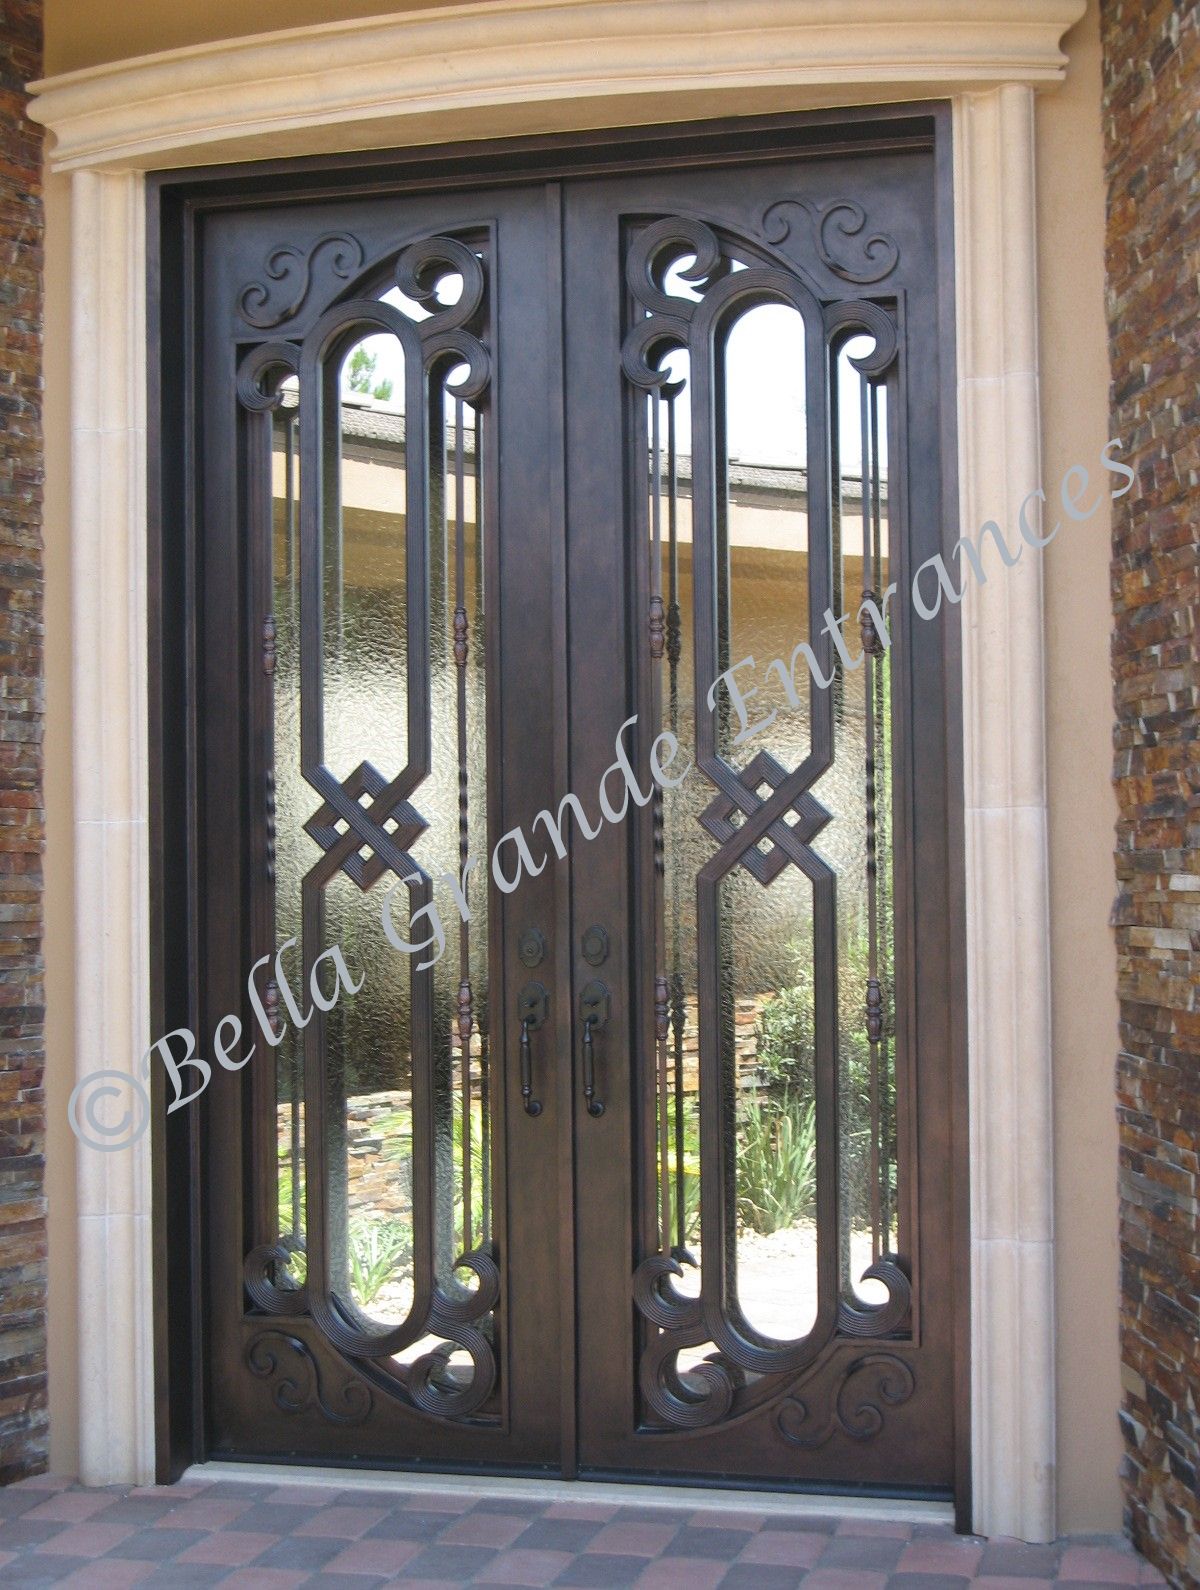 This is a stunning close-up of a beautifully crafted double iron door that graces the entrance of a magnificent house in Las Vegas.